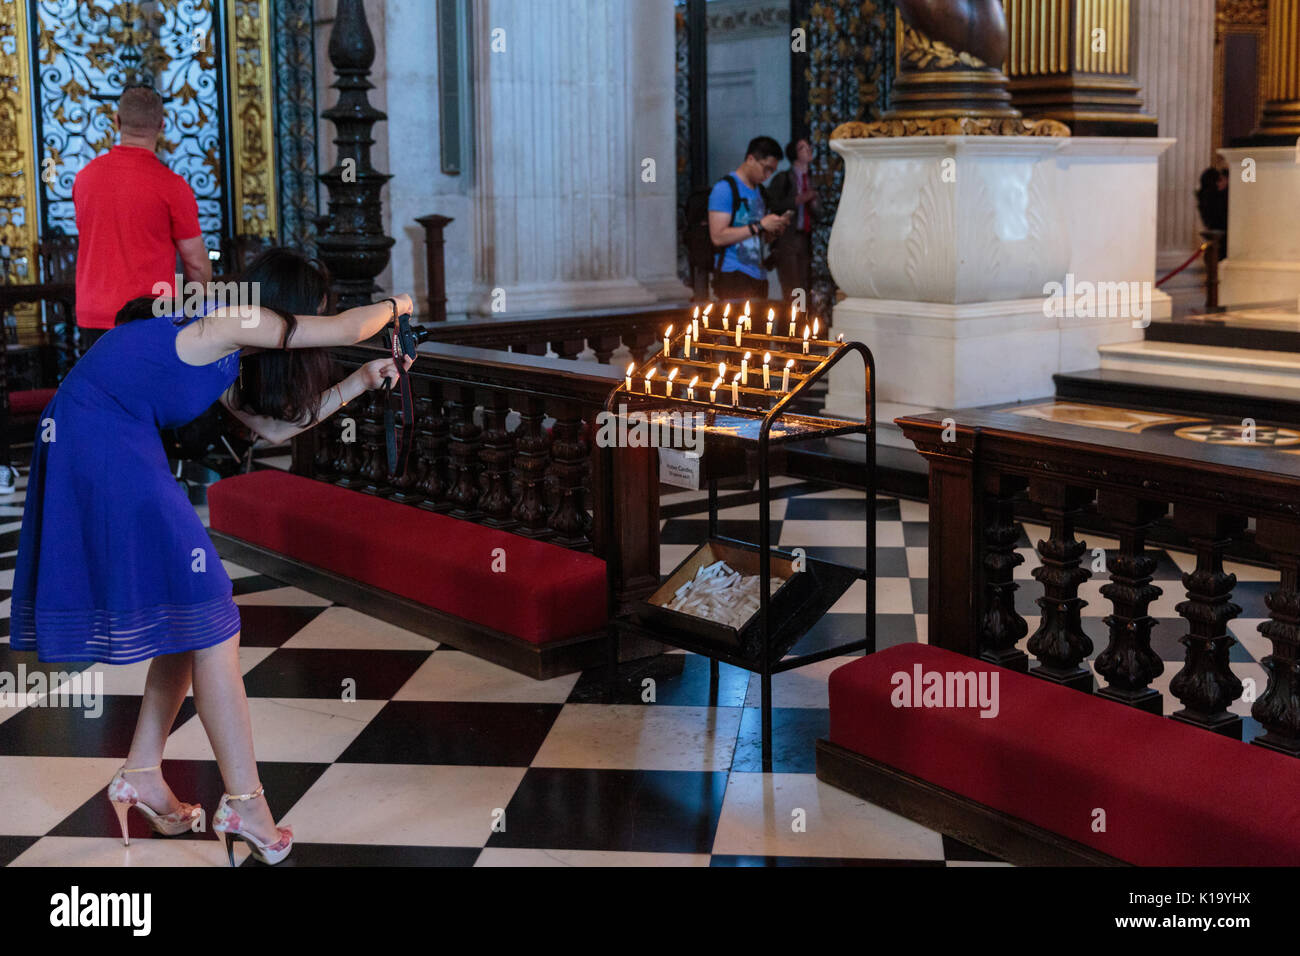 Female tourist taking photo of candles inside St Paul's Cathedral, London United Kingdom Stock Photo